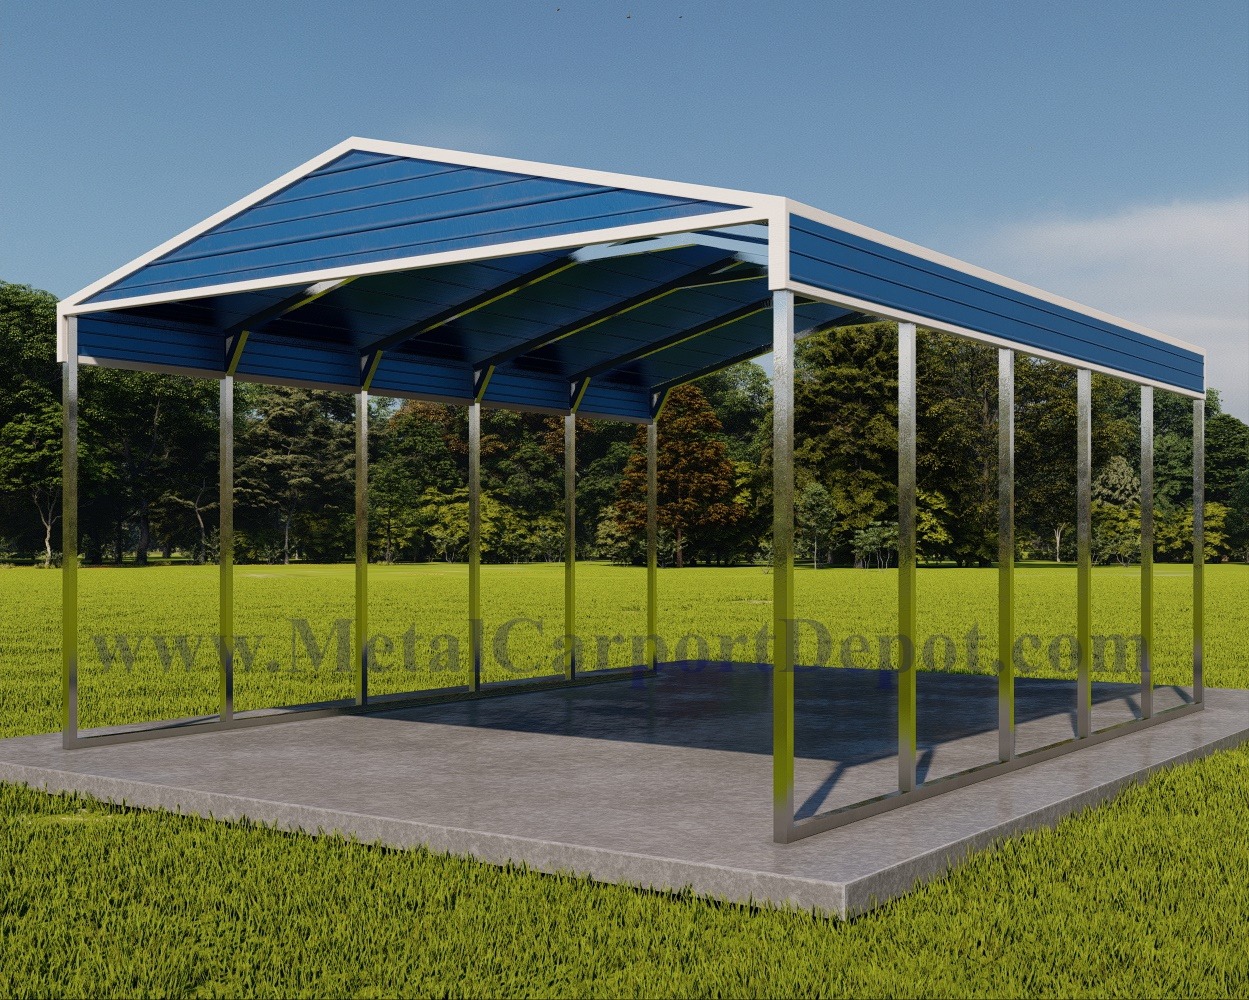 Metal Carport Image With Royal Blue Roof, White Trim, and Royal Blue Gables and panels